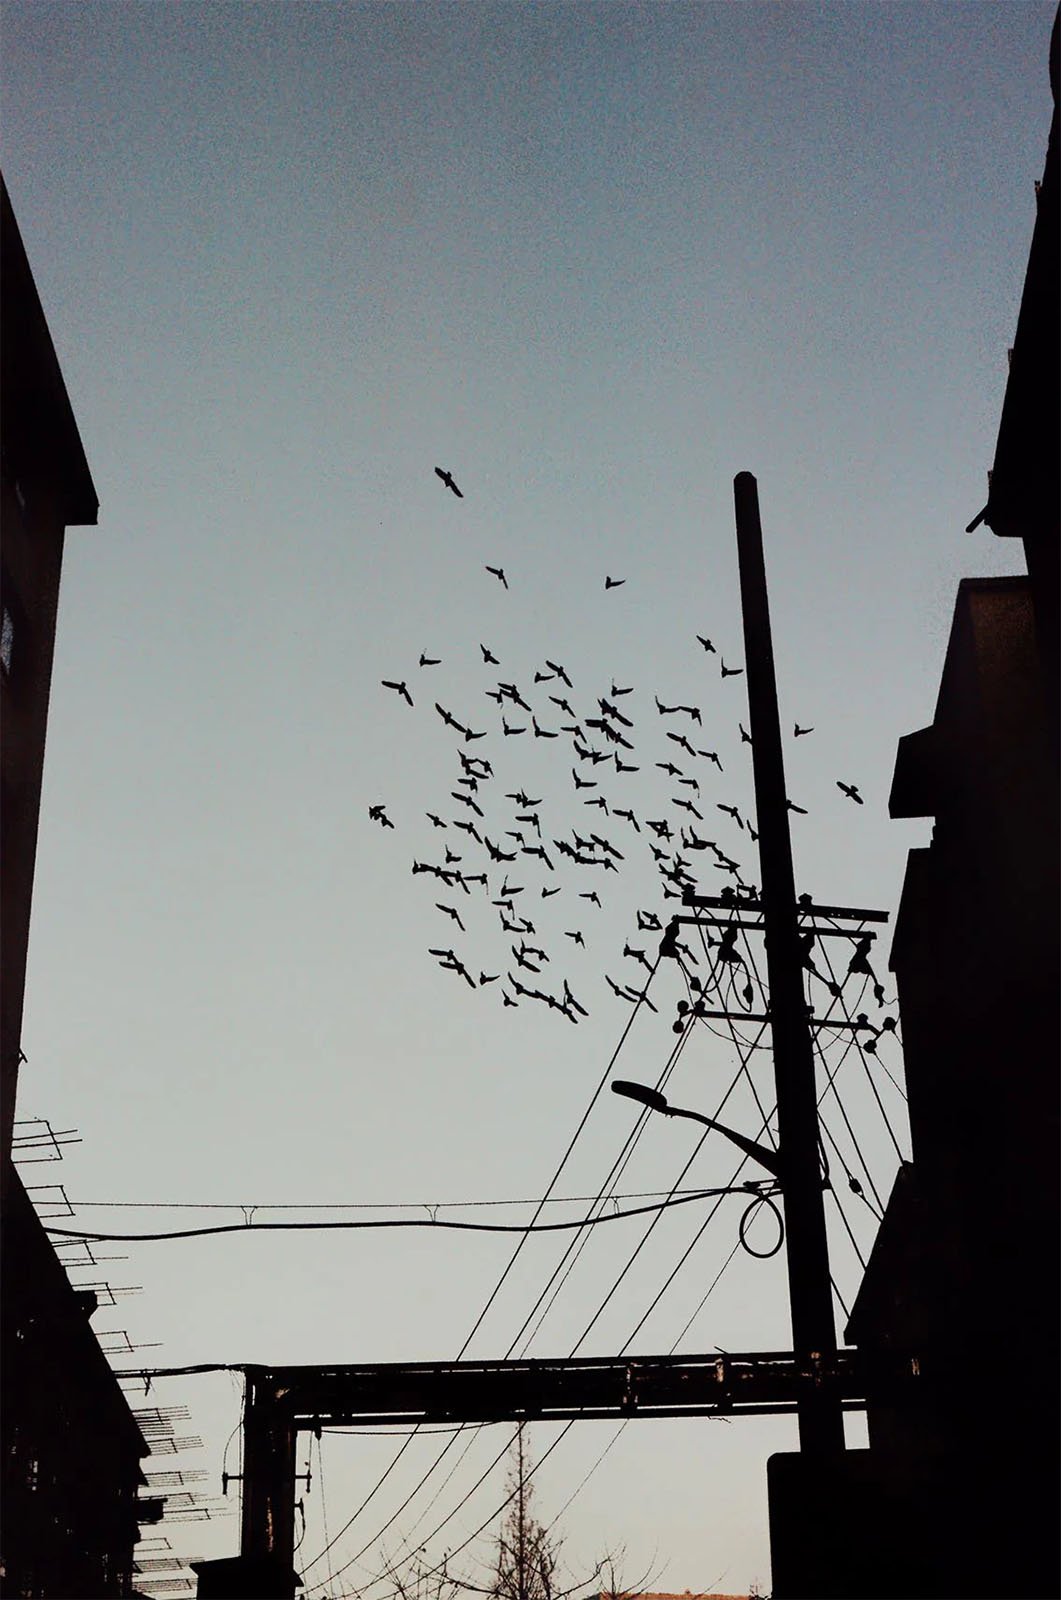 A silhouette of birds flying in the evening sky, framed by urban buildings and electrical wires against a dusky backdrop.